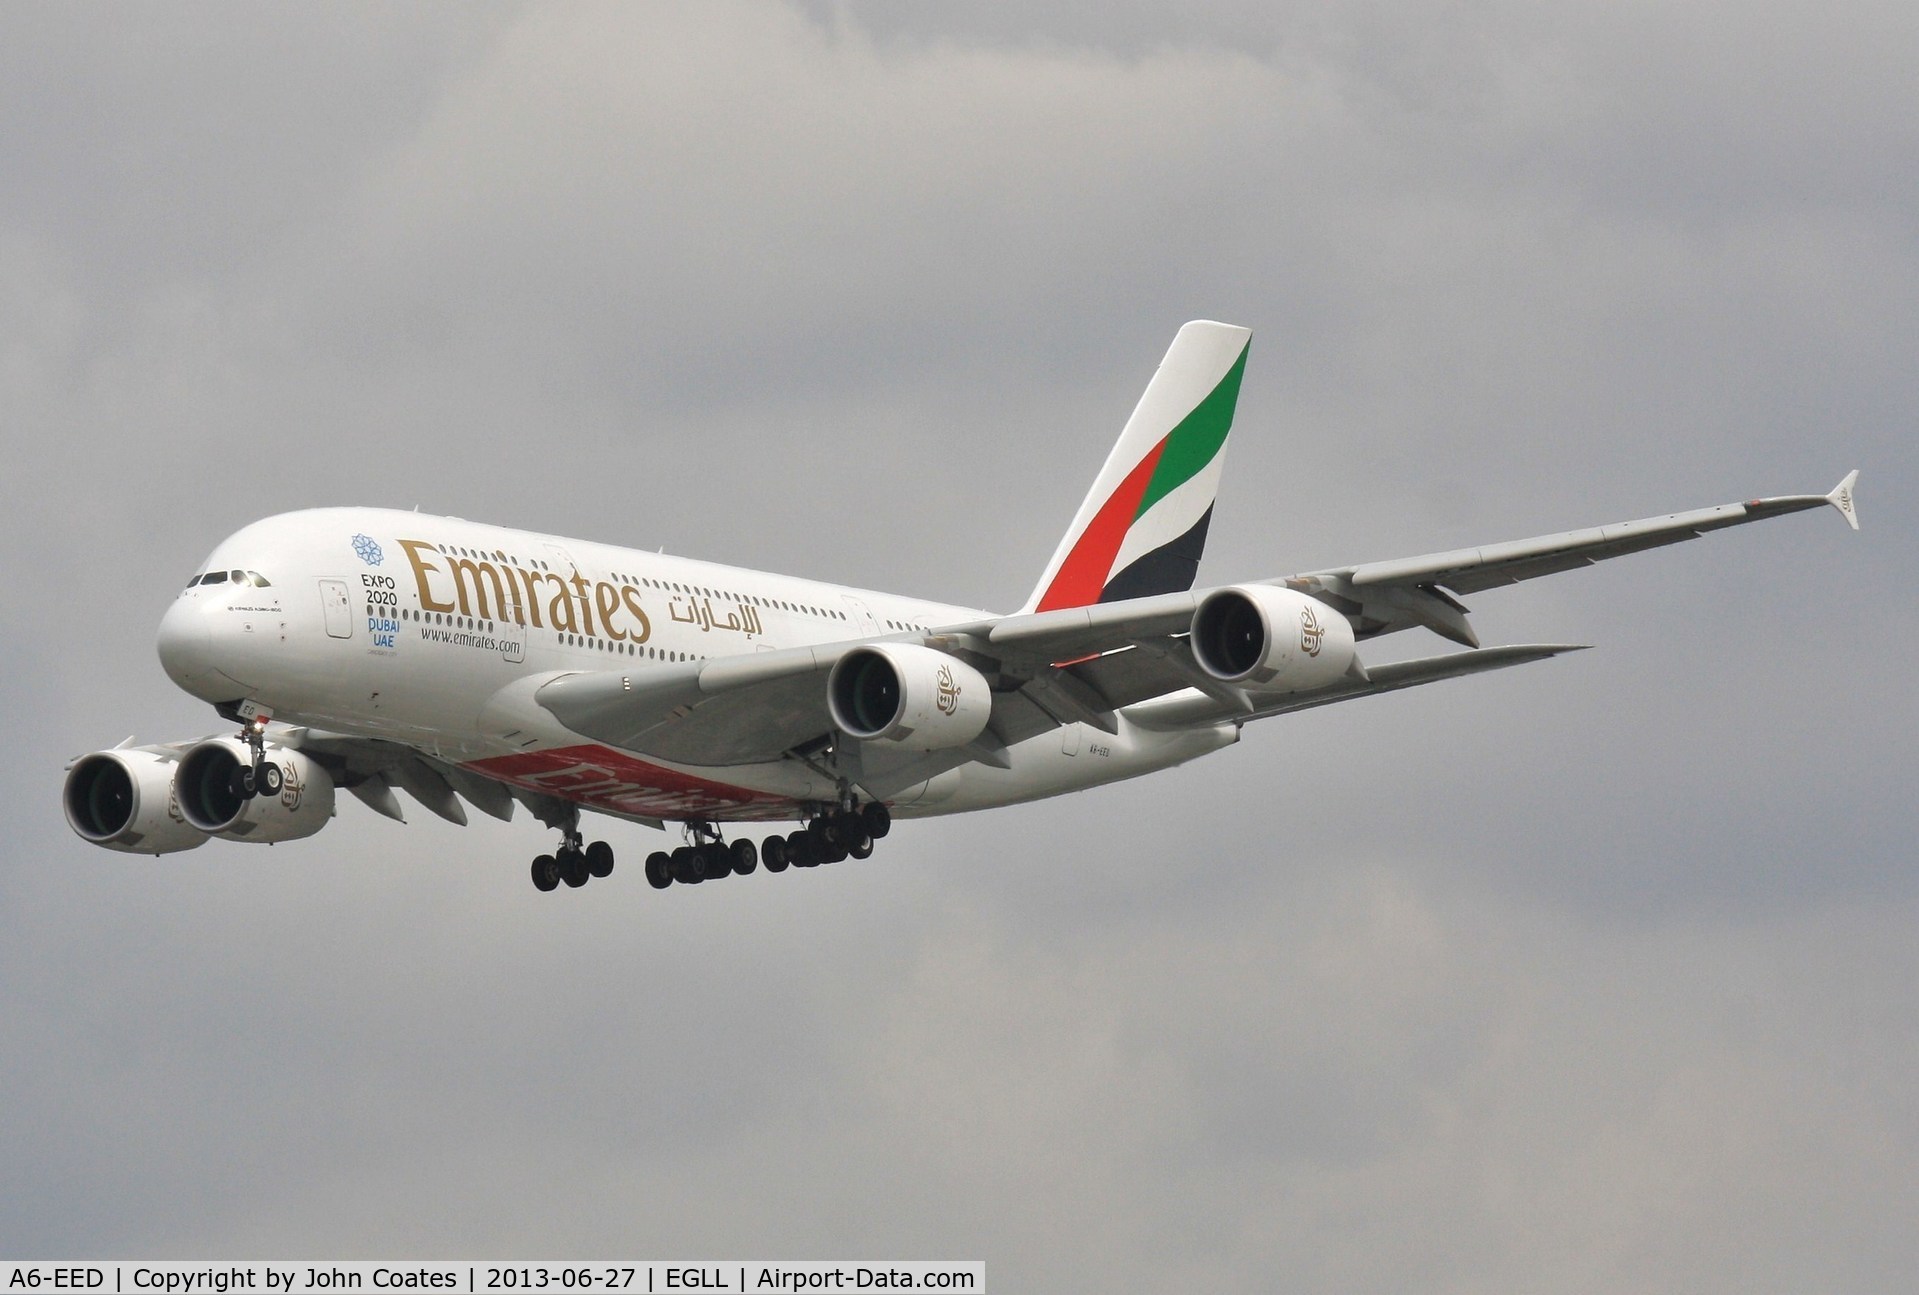 A6-EED, 2012 Airbus A380-861 C/N 111, On approach to 27L - Expo 2020 Dubai logos